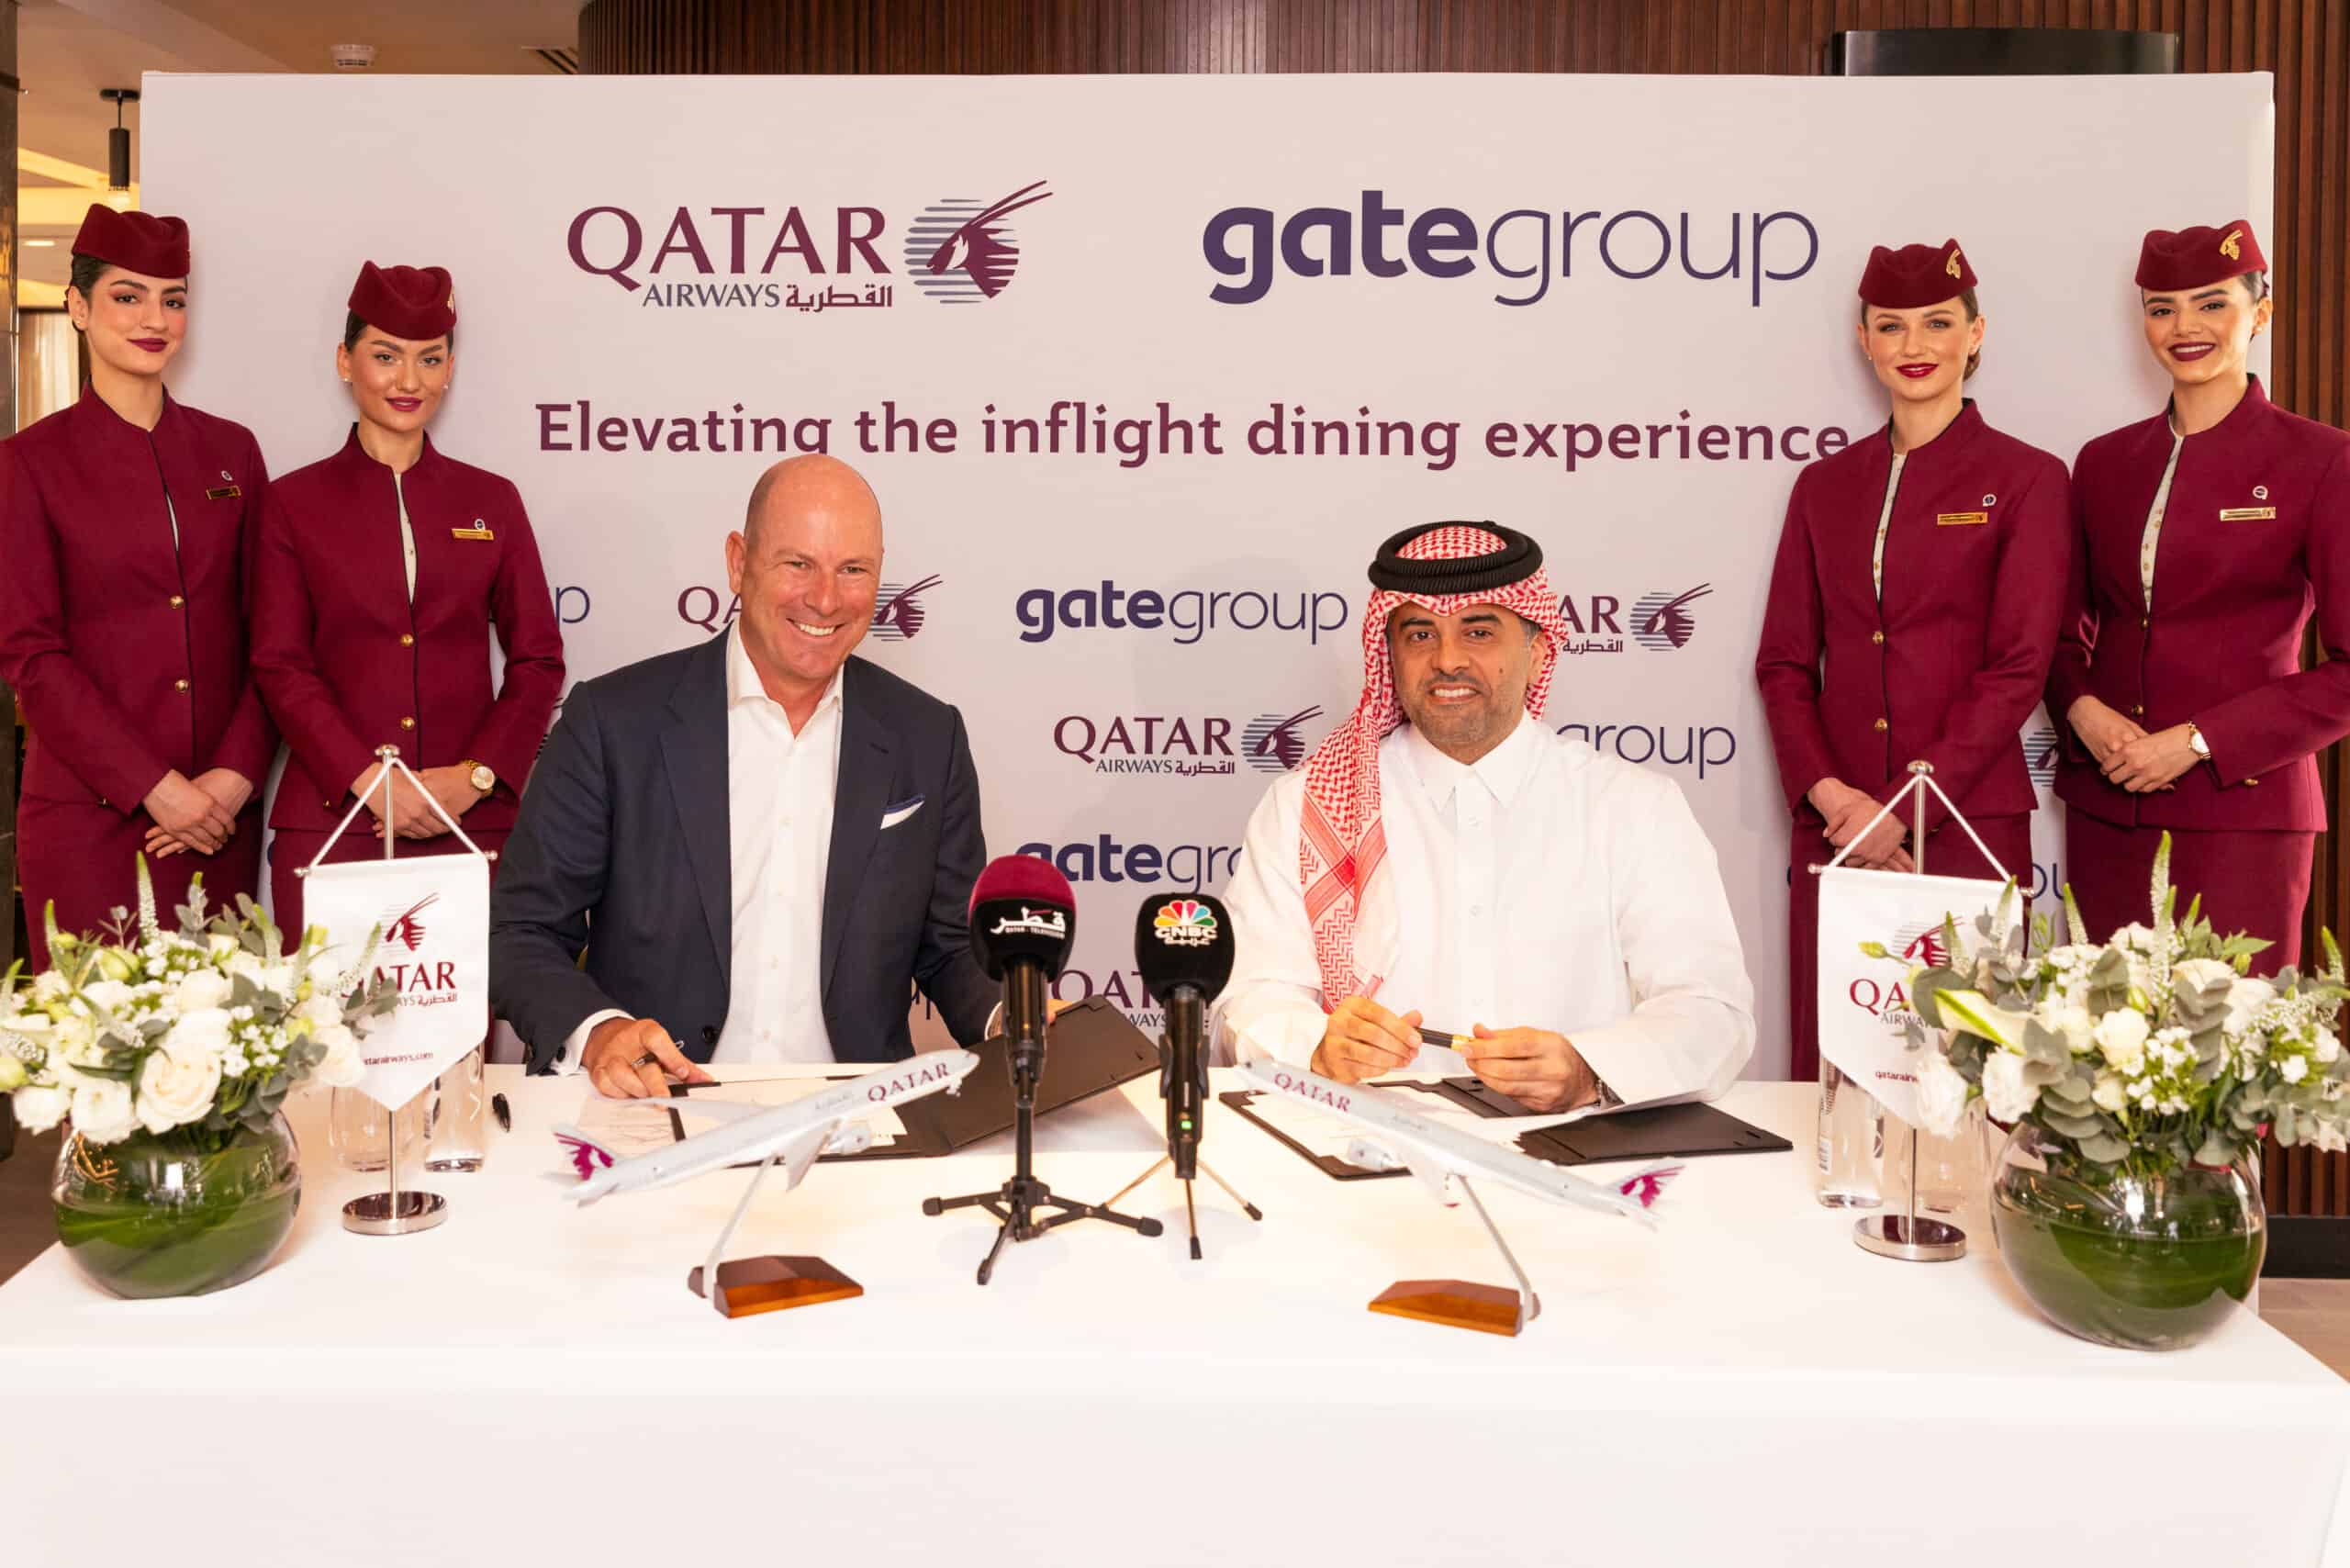 Qatar Airways and gategroup Launch New Partnership to Elevate Inflight Dining